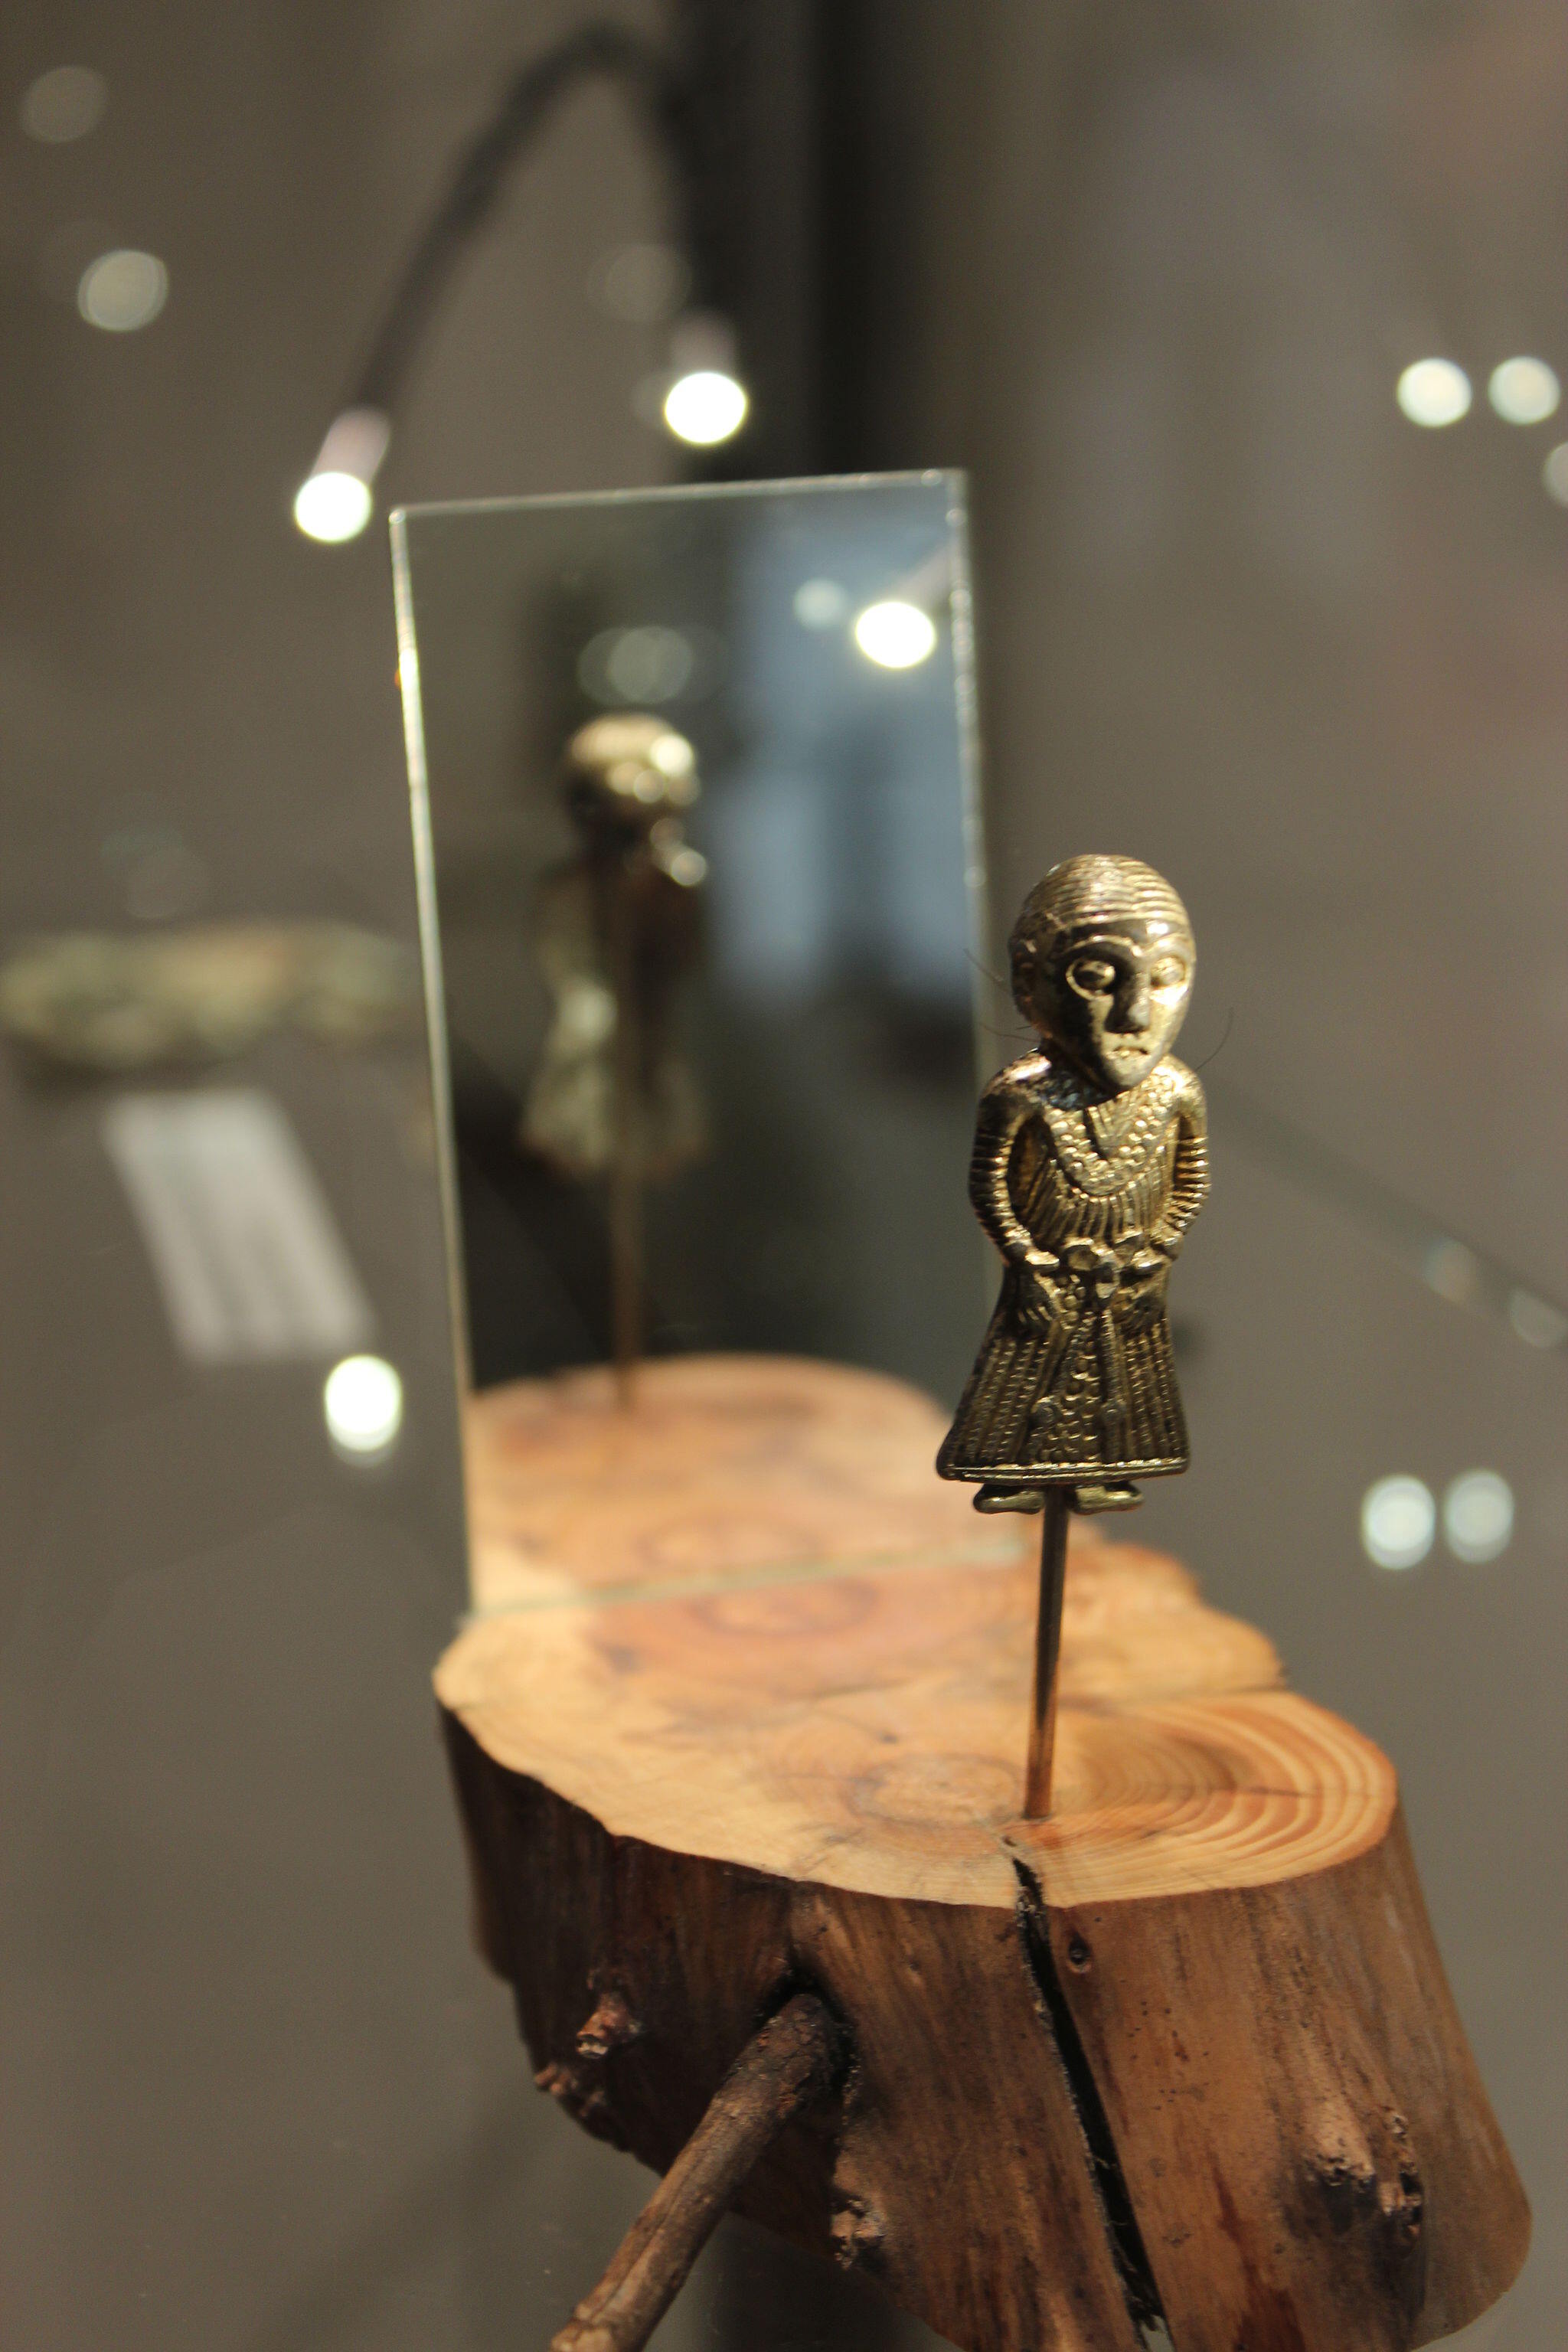 Revninge-woman. Found in april 2014. Made of silver and dated to around year 800. At exhibition at Vikingmuseum Ladby